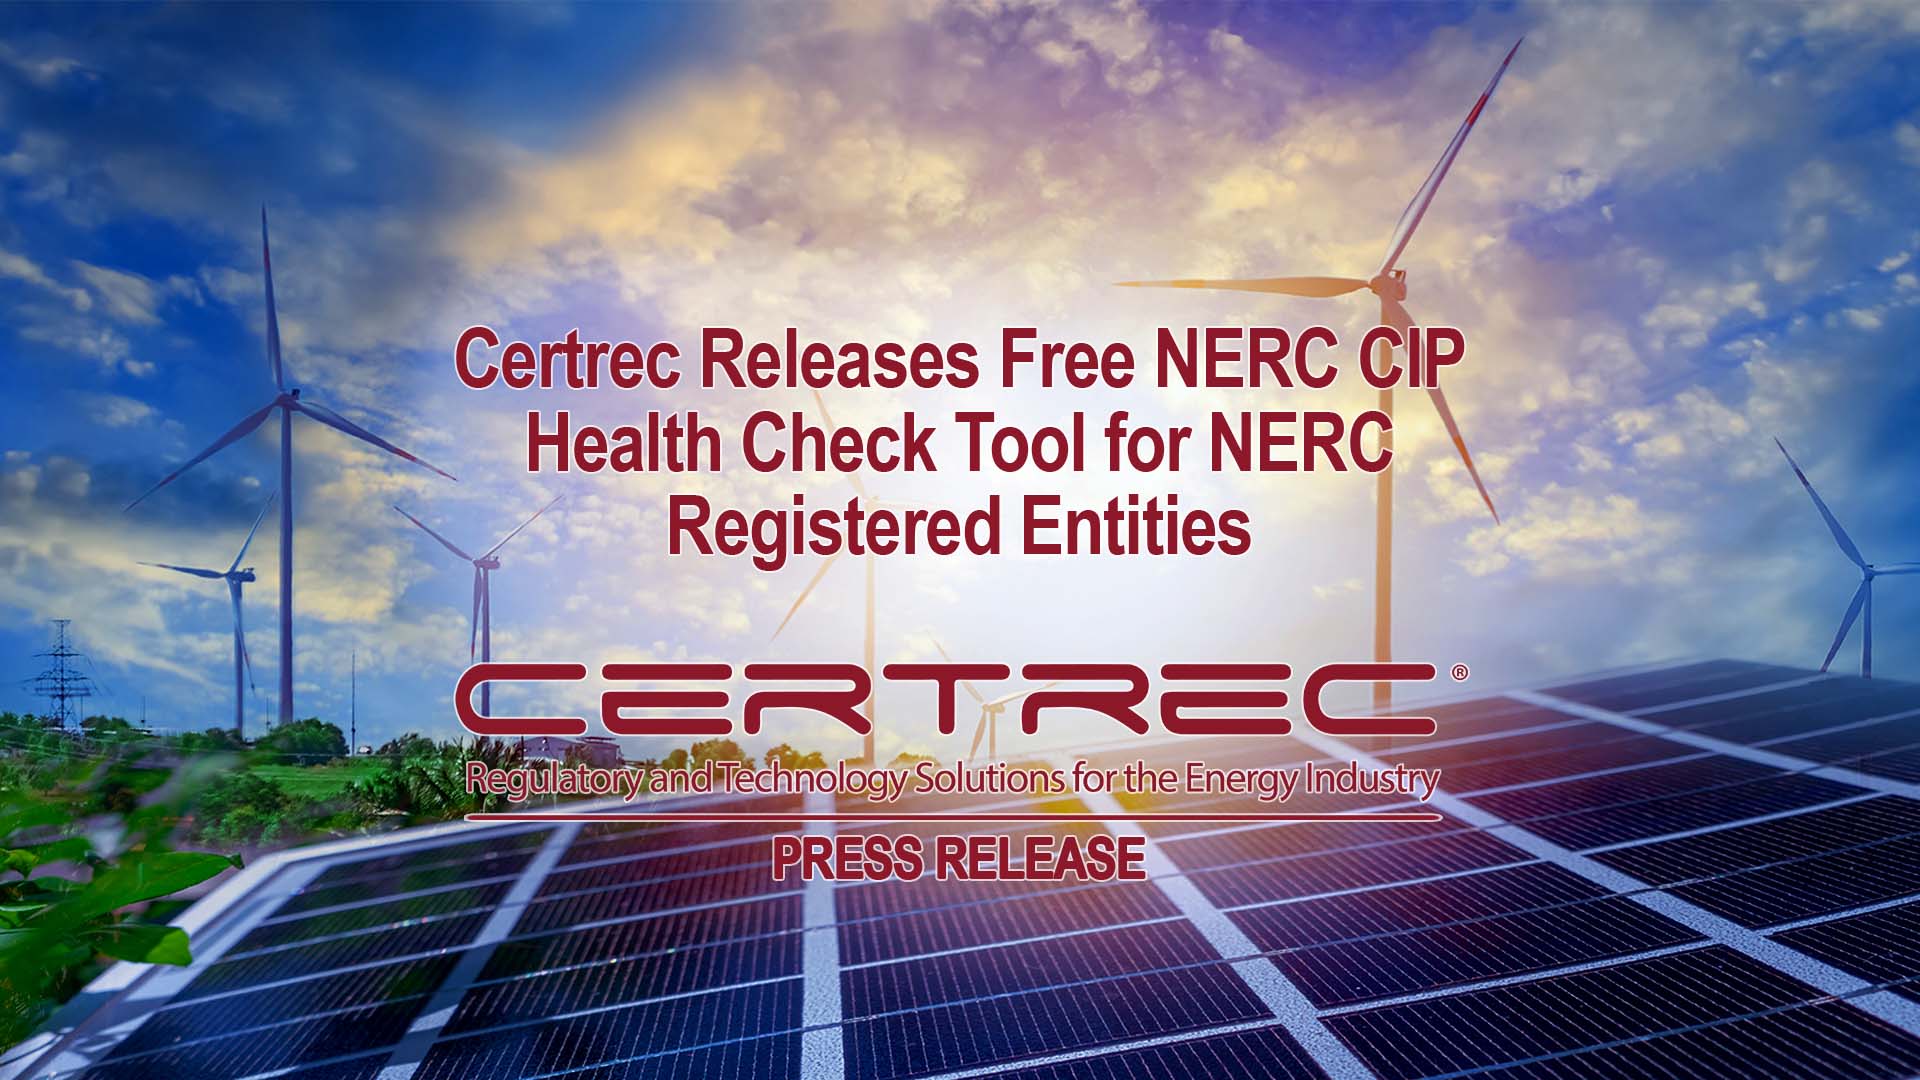 Certrec Releases Free NERC CIP Health Check Tool for NERC Registered Entities – Press Release – Certrec